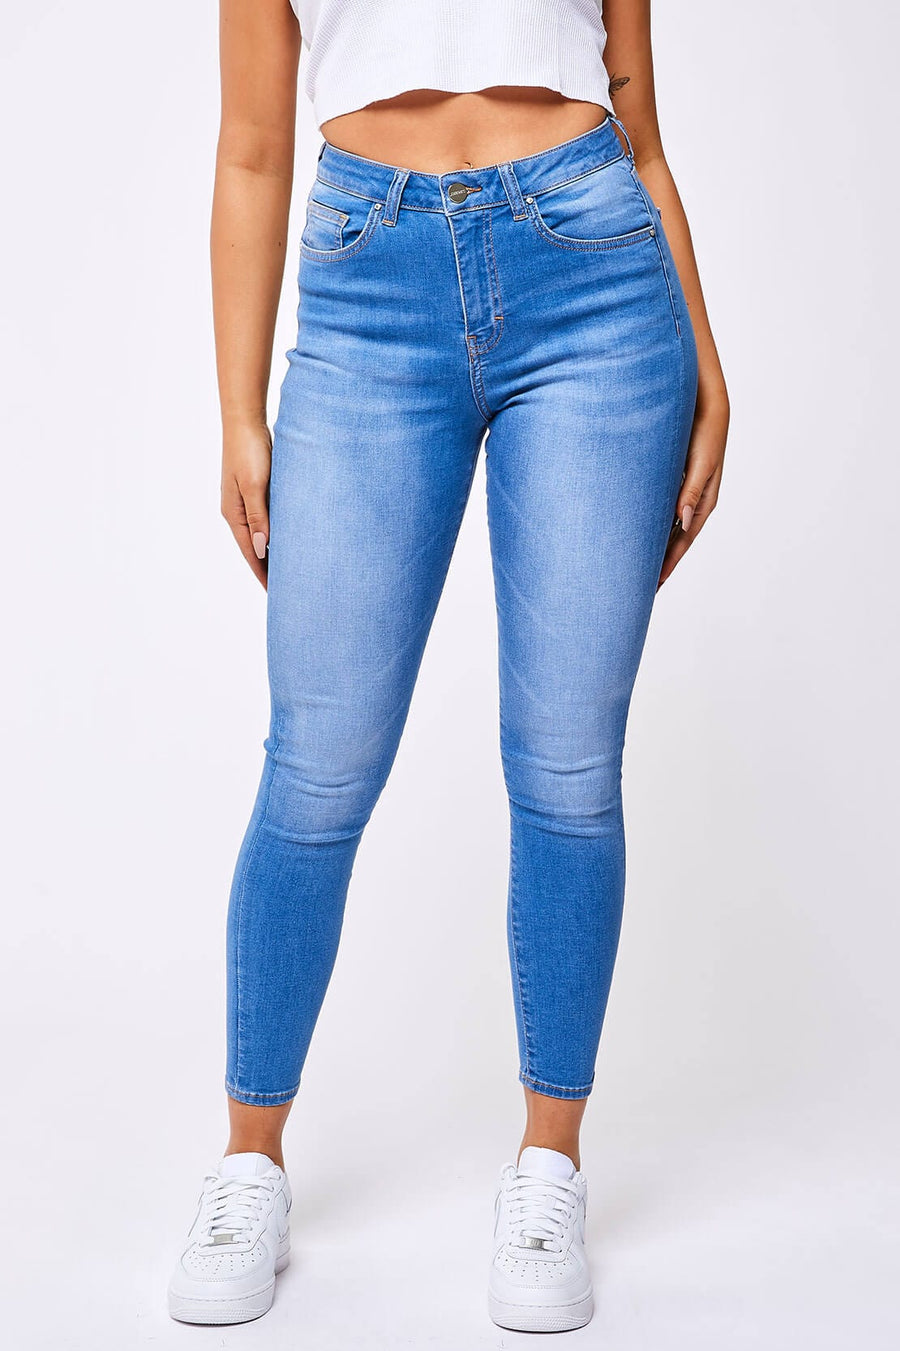 Legend London Womens Jeans SKINNY JEANS - STRONG WASHED AQUA BLUE